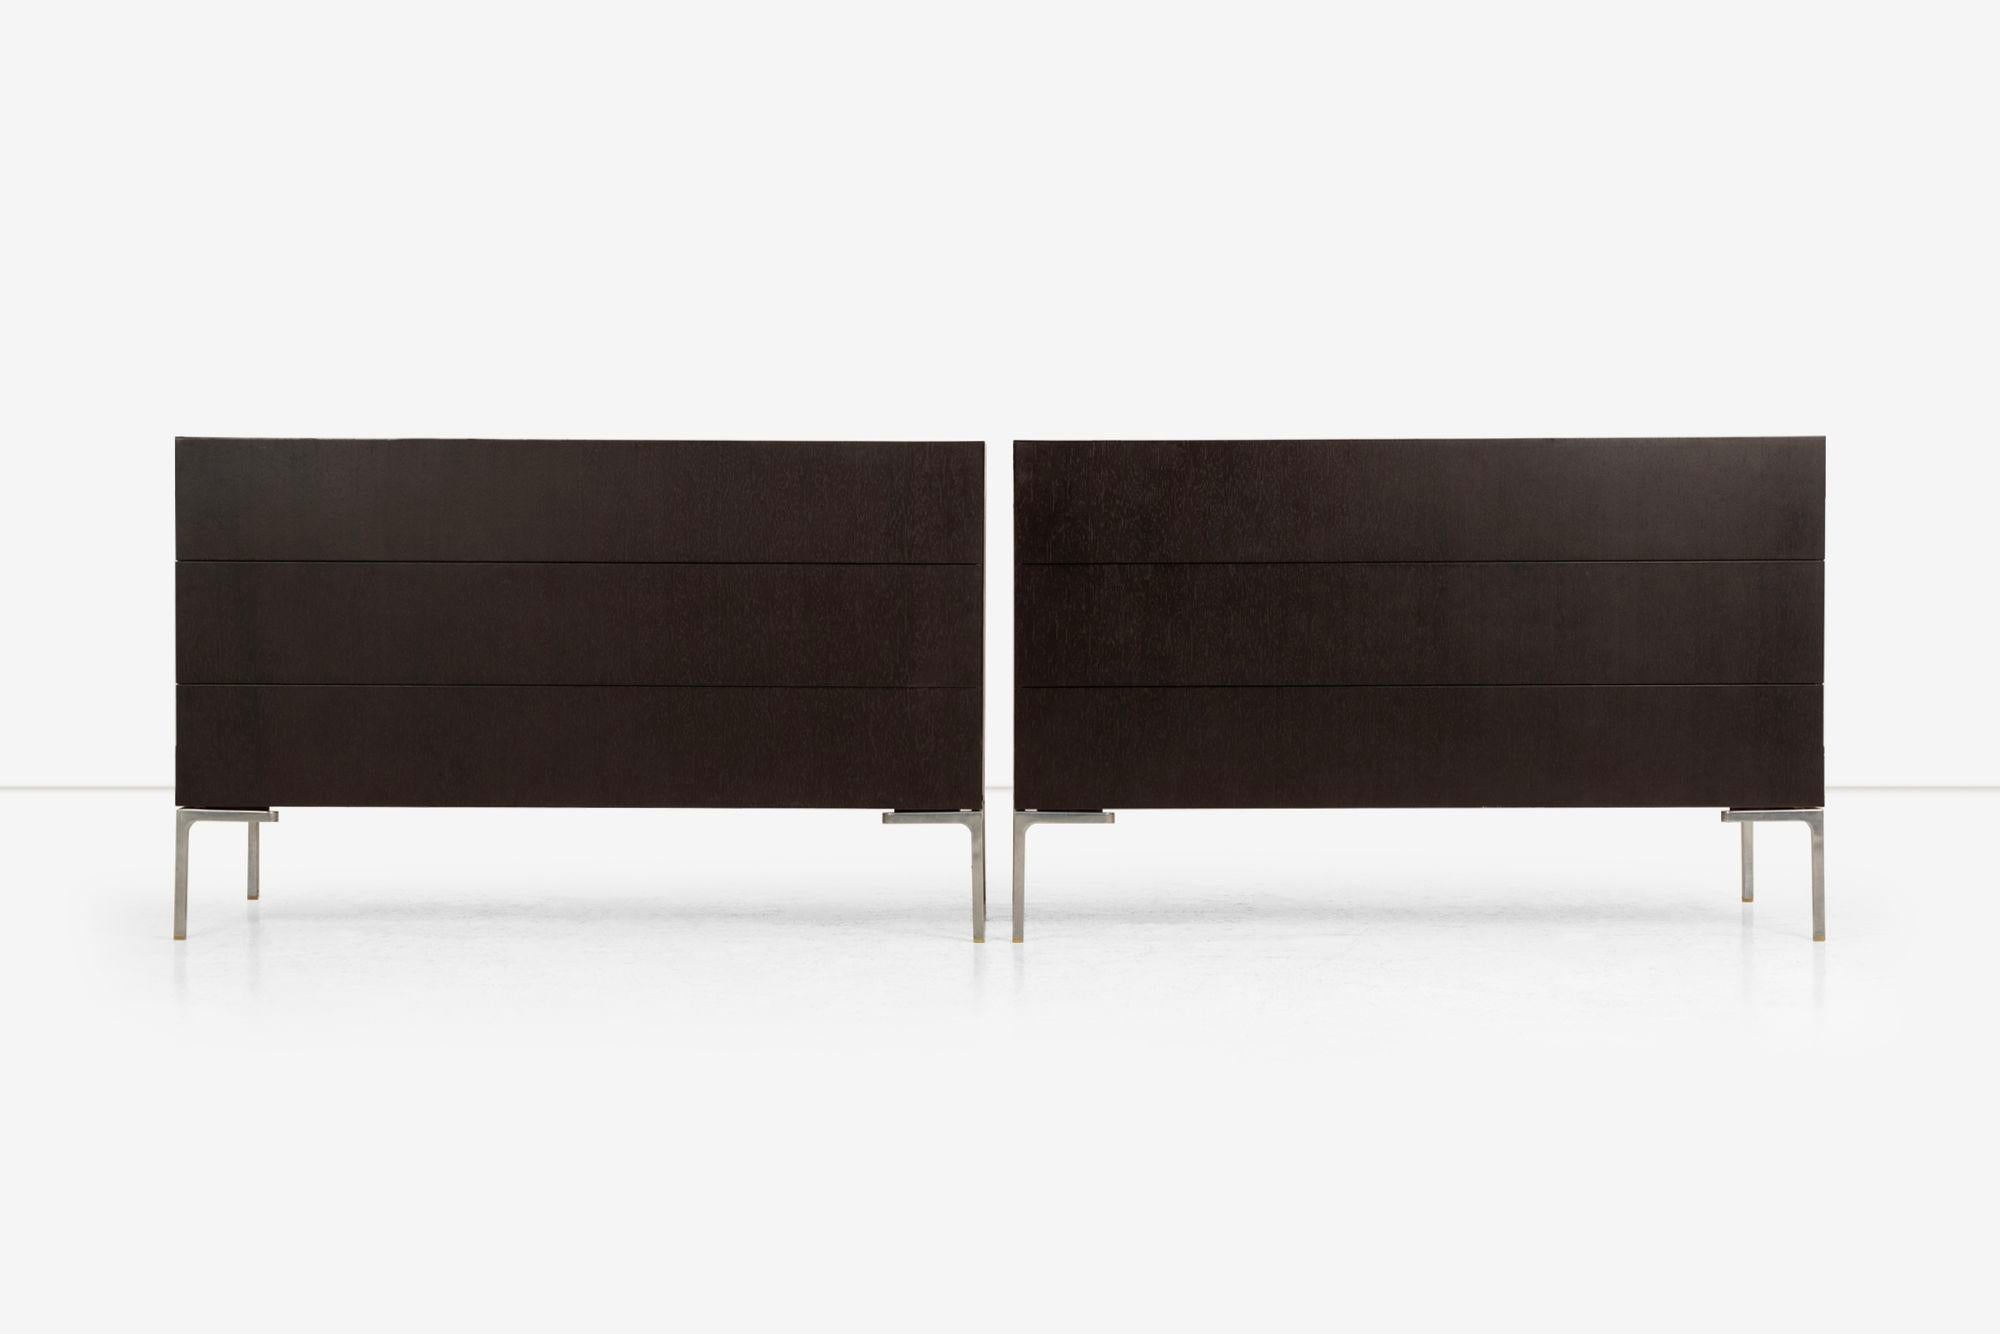 Antonio Citterio for B&B Italia Maxalto Charles Cases, Nicely sized, minimal modern cabinets by Antonio Citterio for B&B Italia's Maxalto line. Each long and low case features three drawers and sits atop solid steel legs.
These cabinets come from